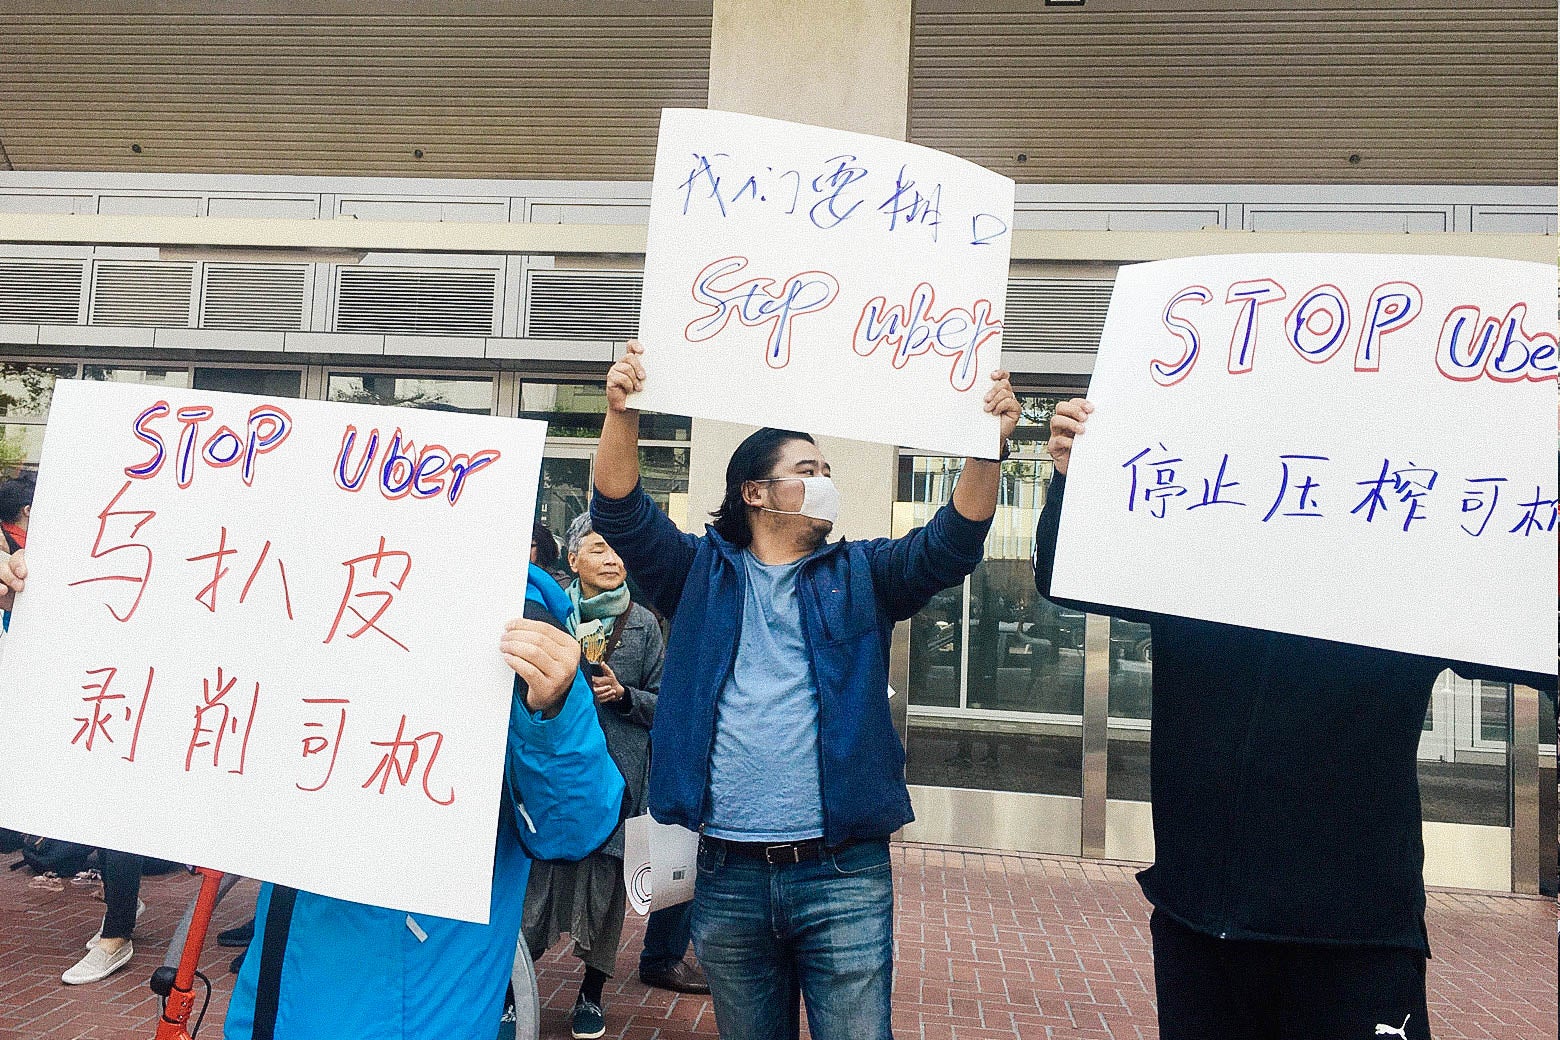 Protesters holding anti-Uber signs in Chinese.